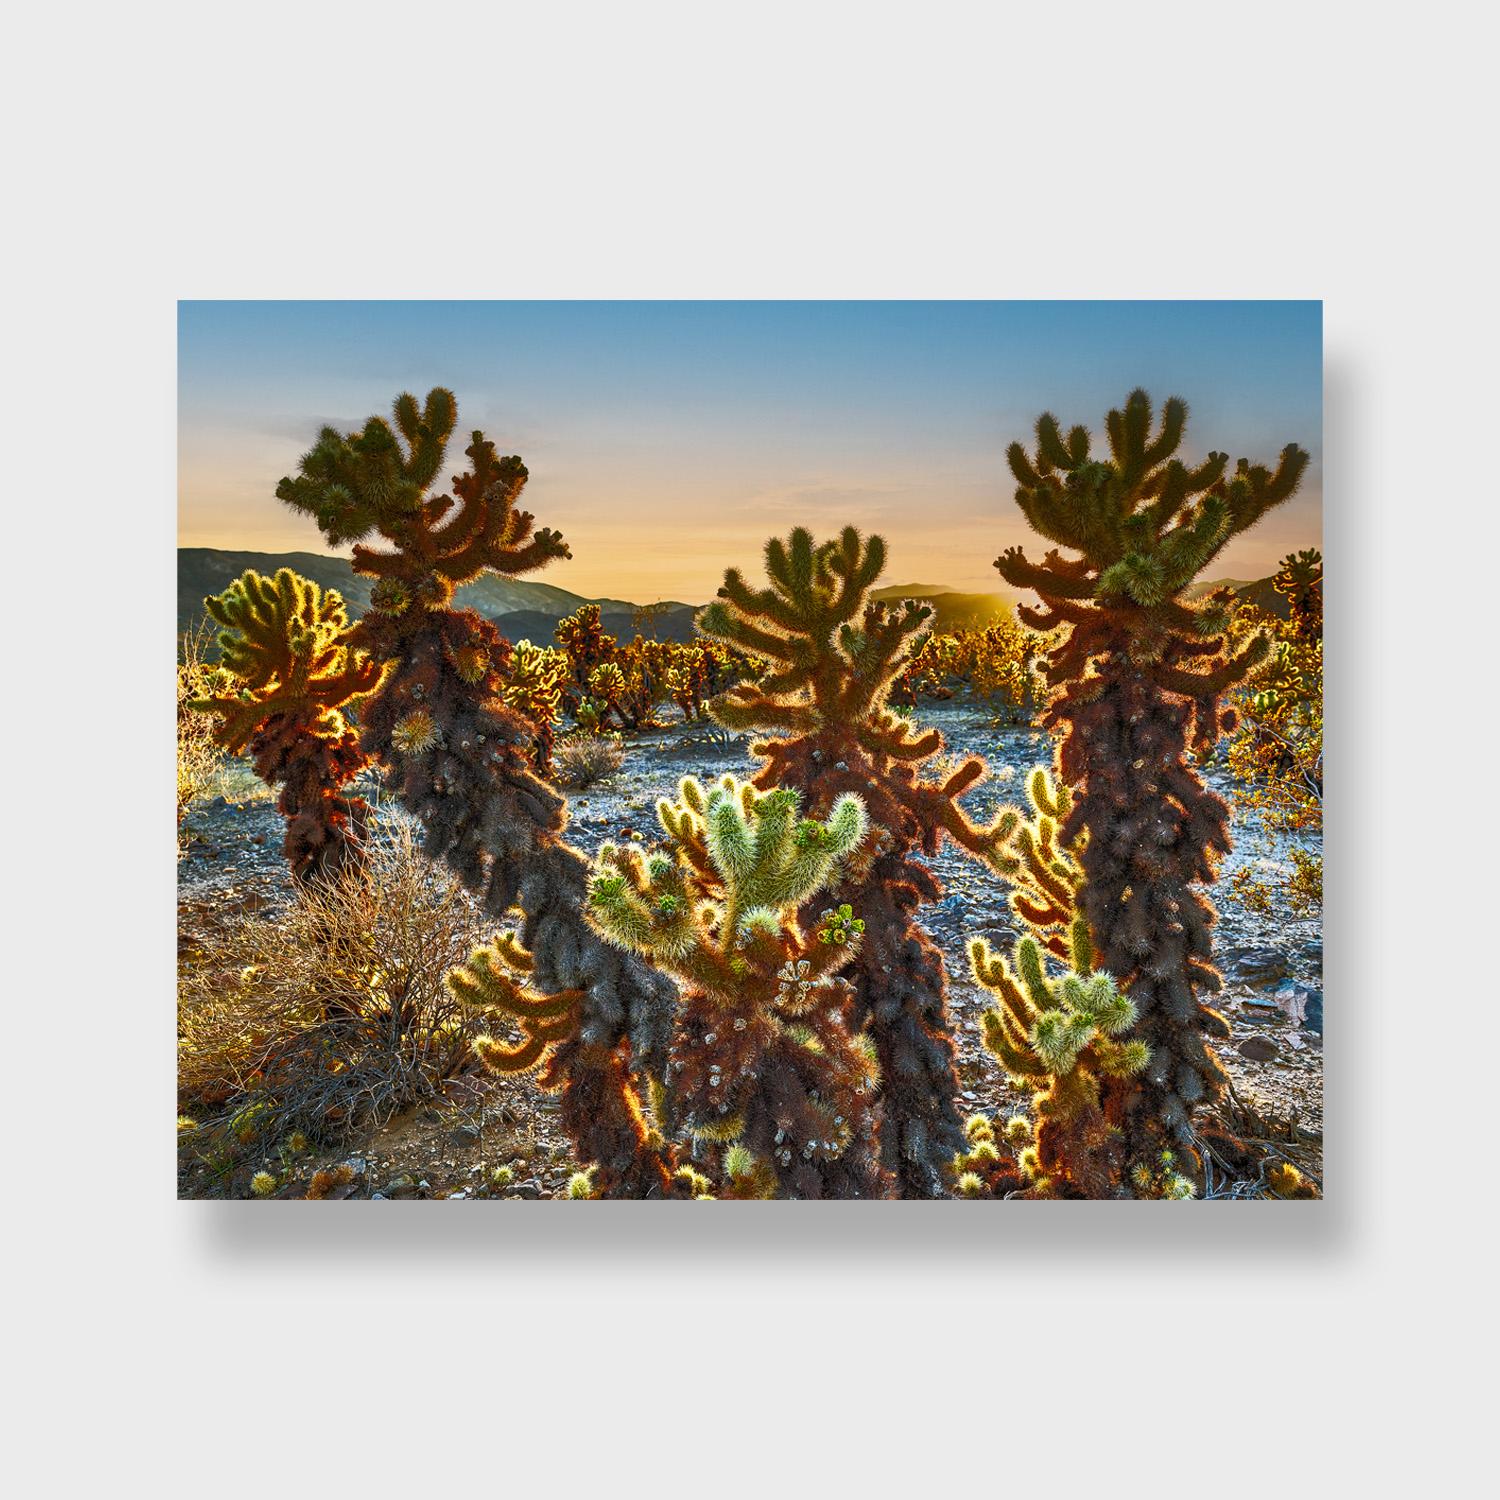 These are photographic prints done on sheets of metal by the Southern California artist Doug Dolde. There are three available sizes, 18